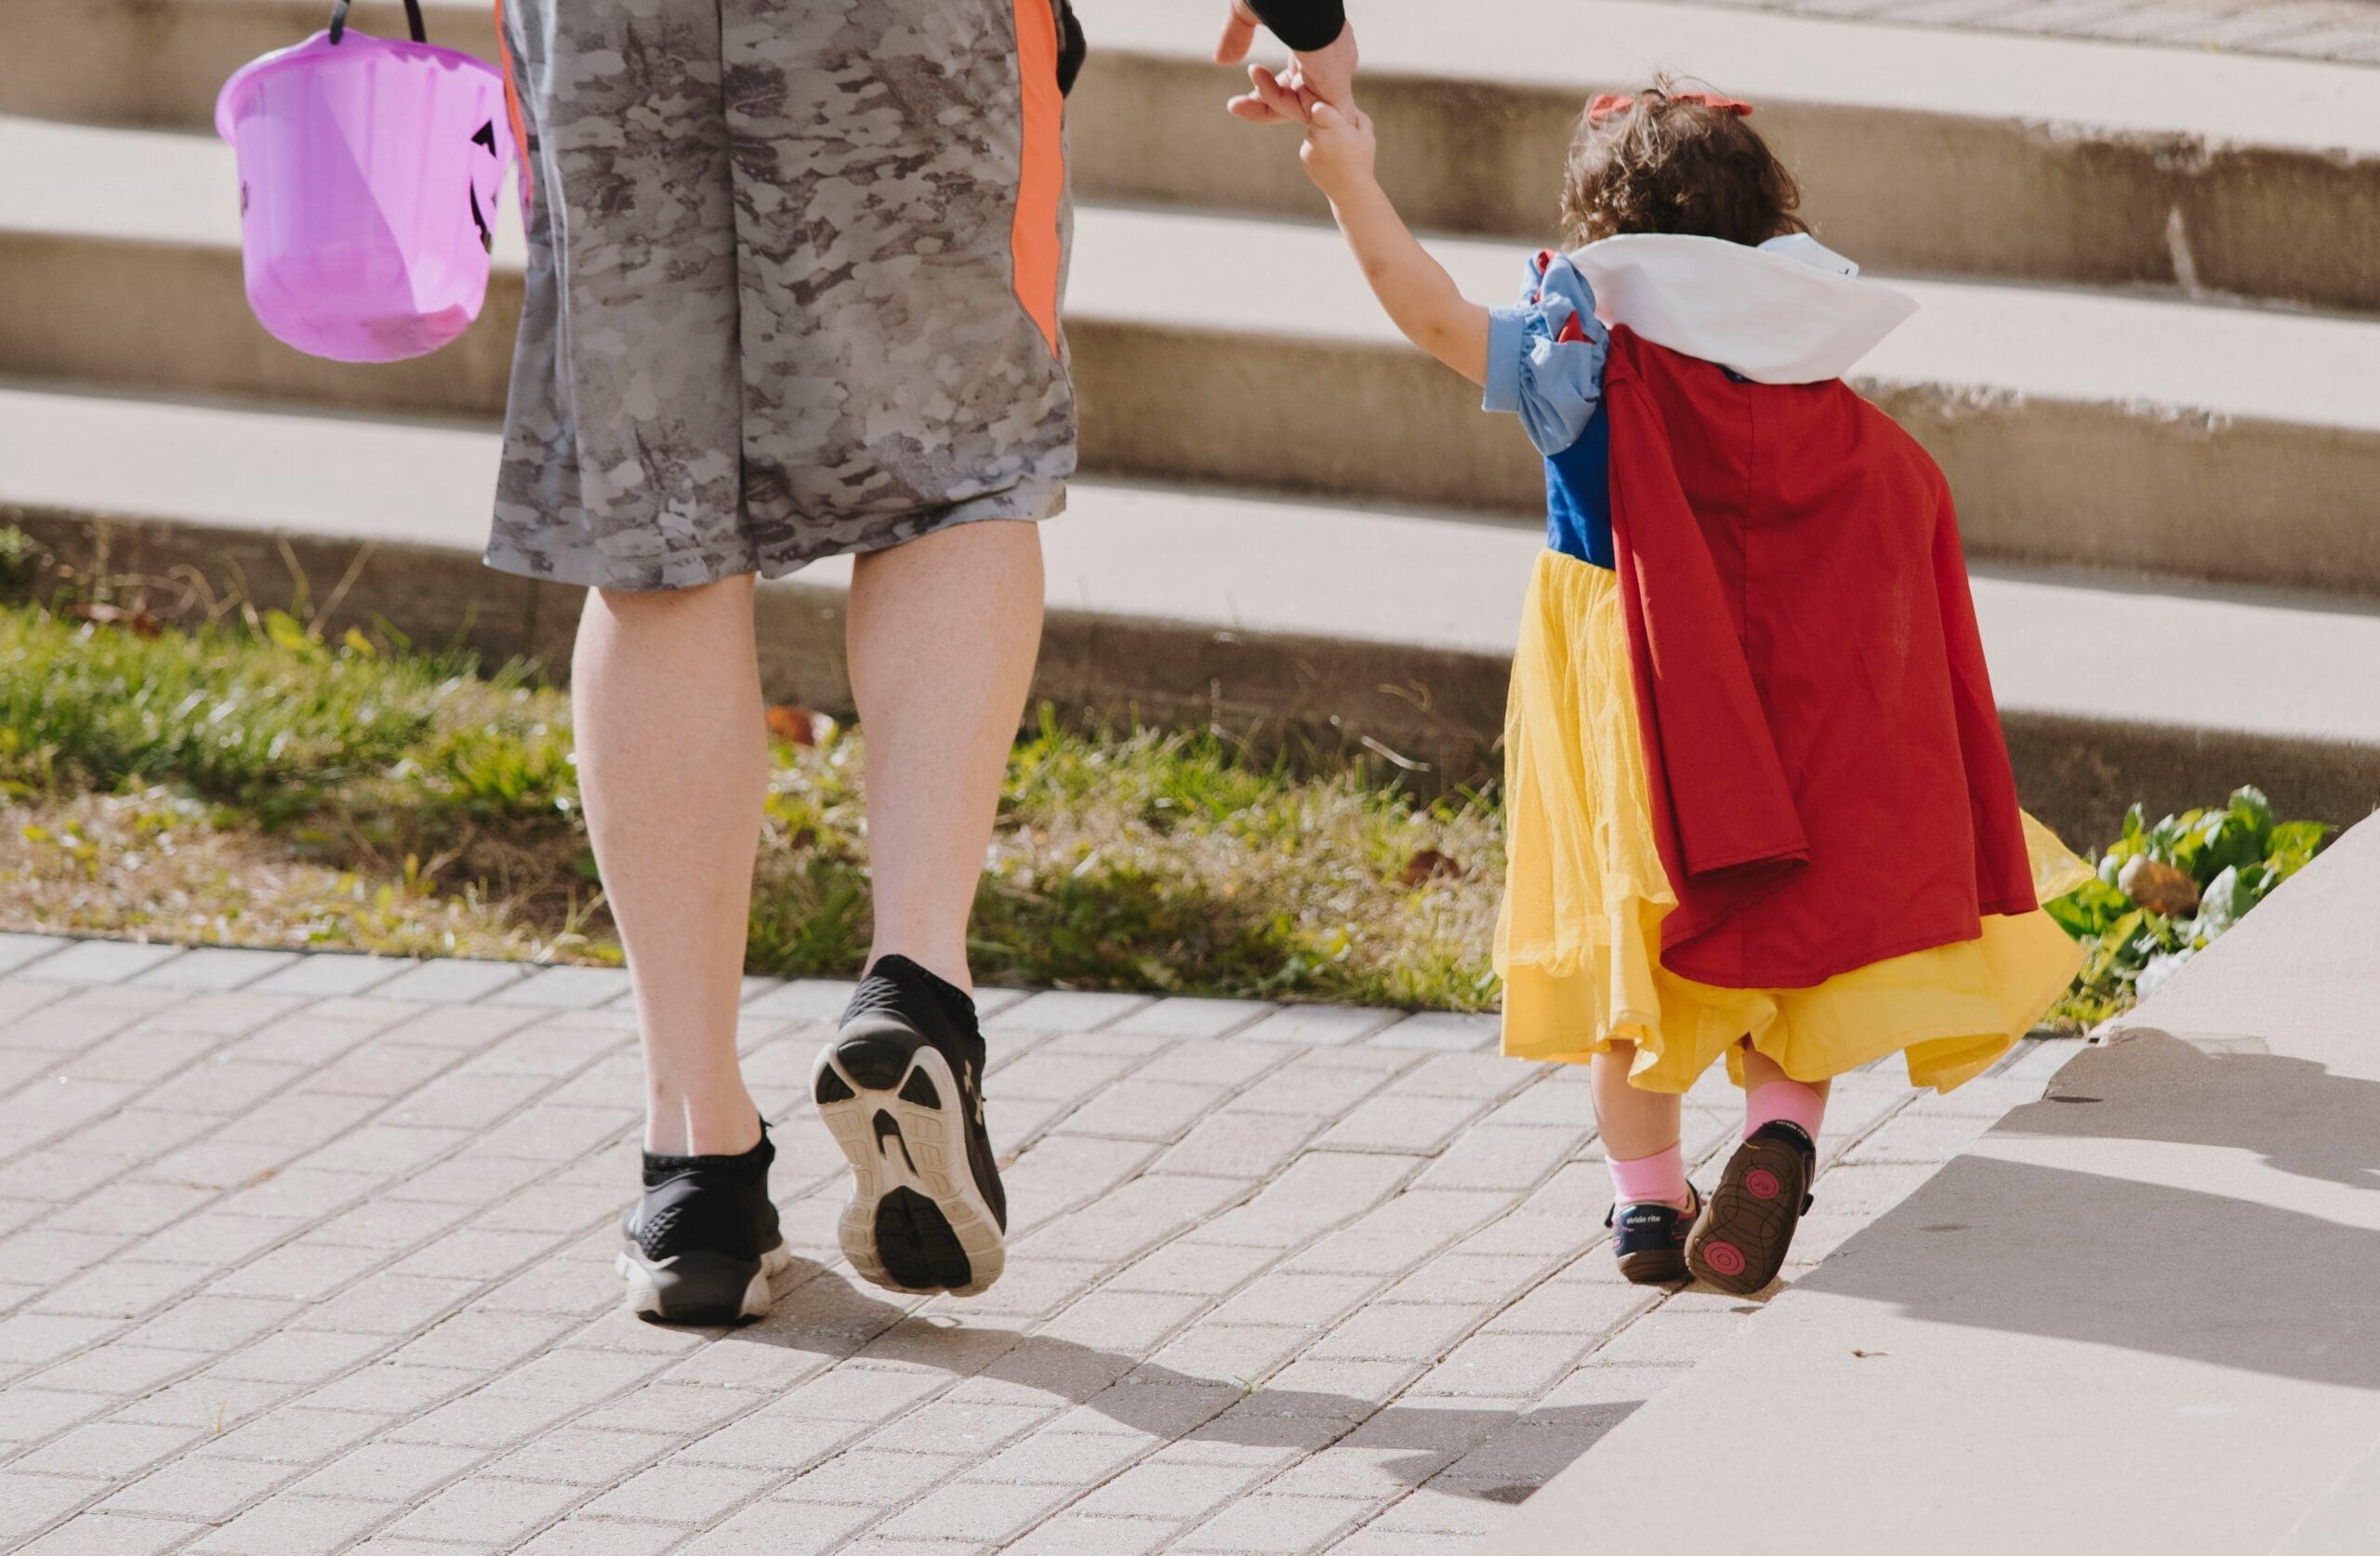 Little girl dressed as Snow White holding adult's hand